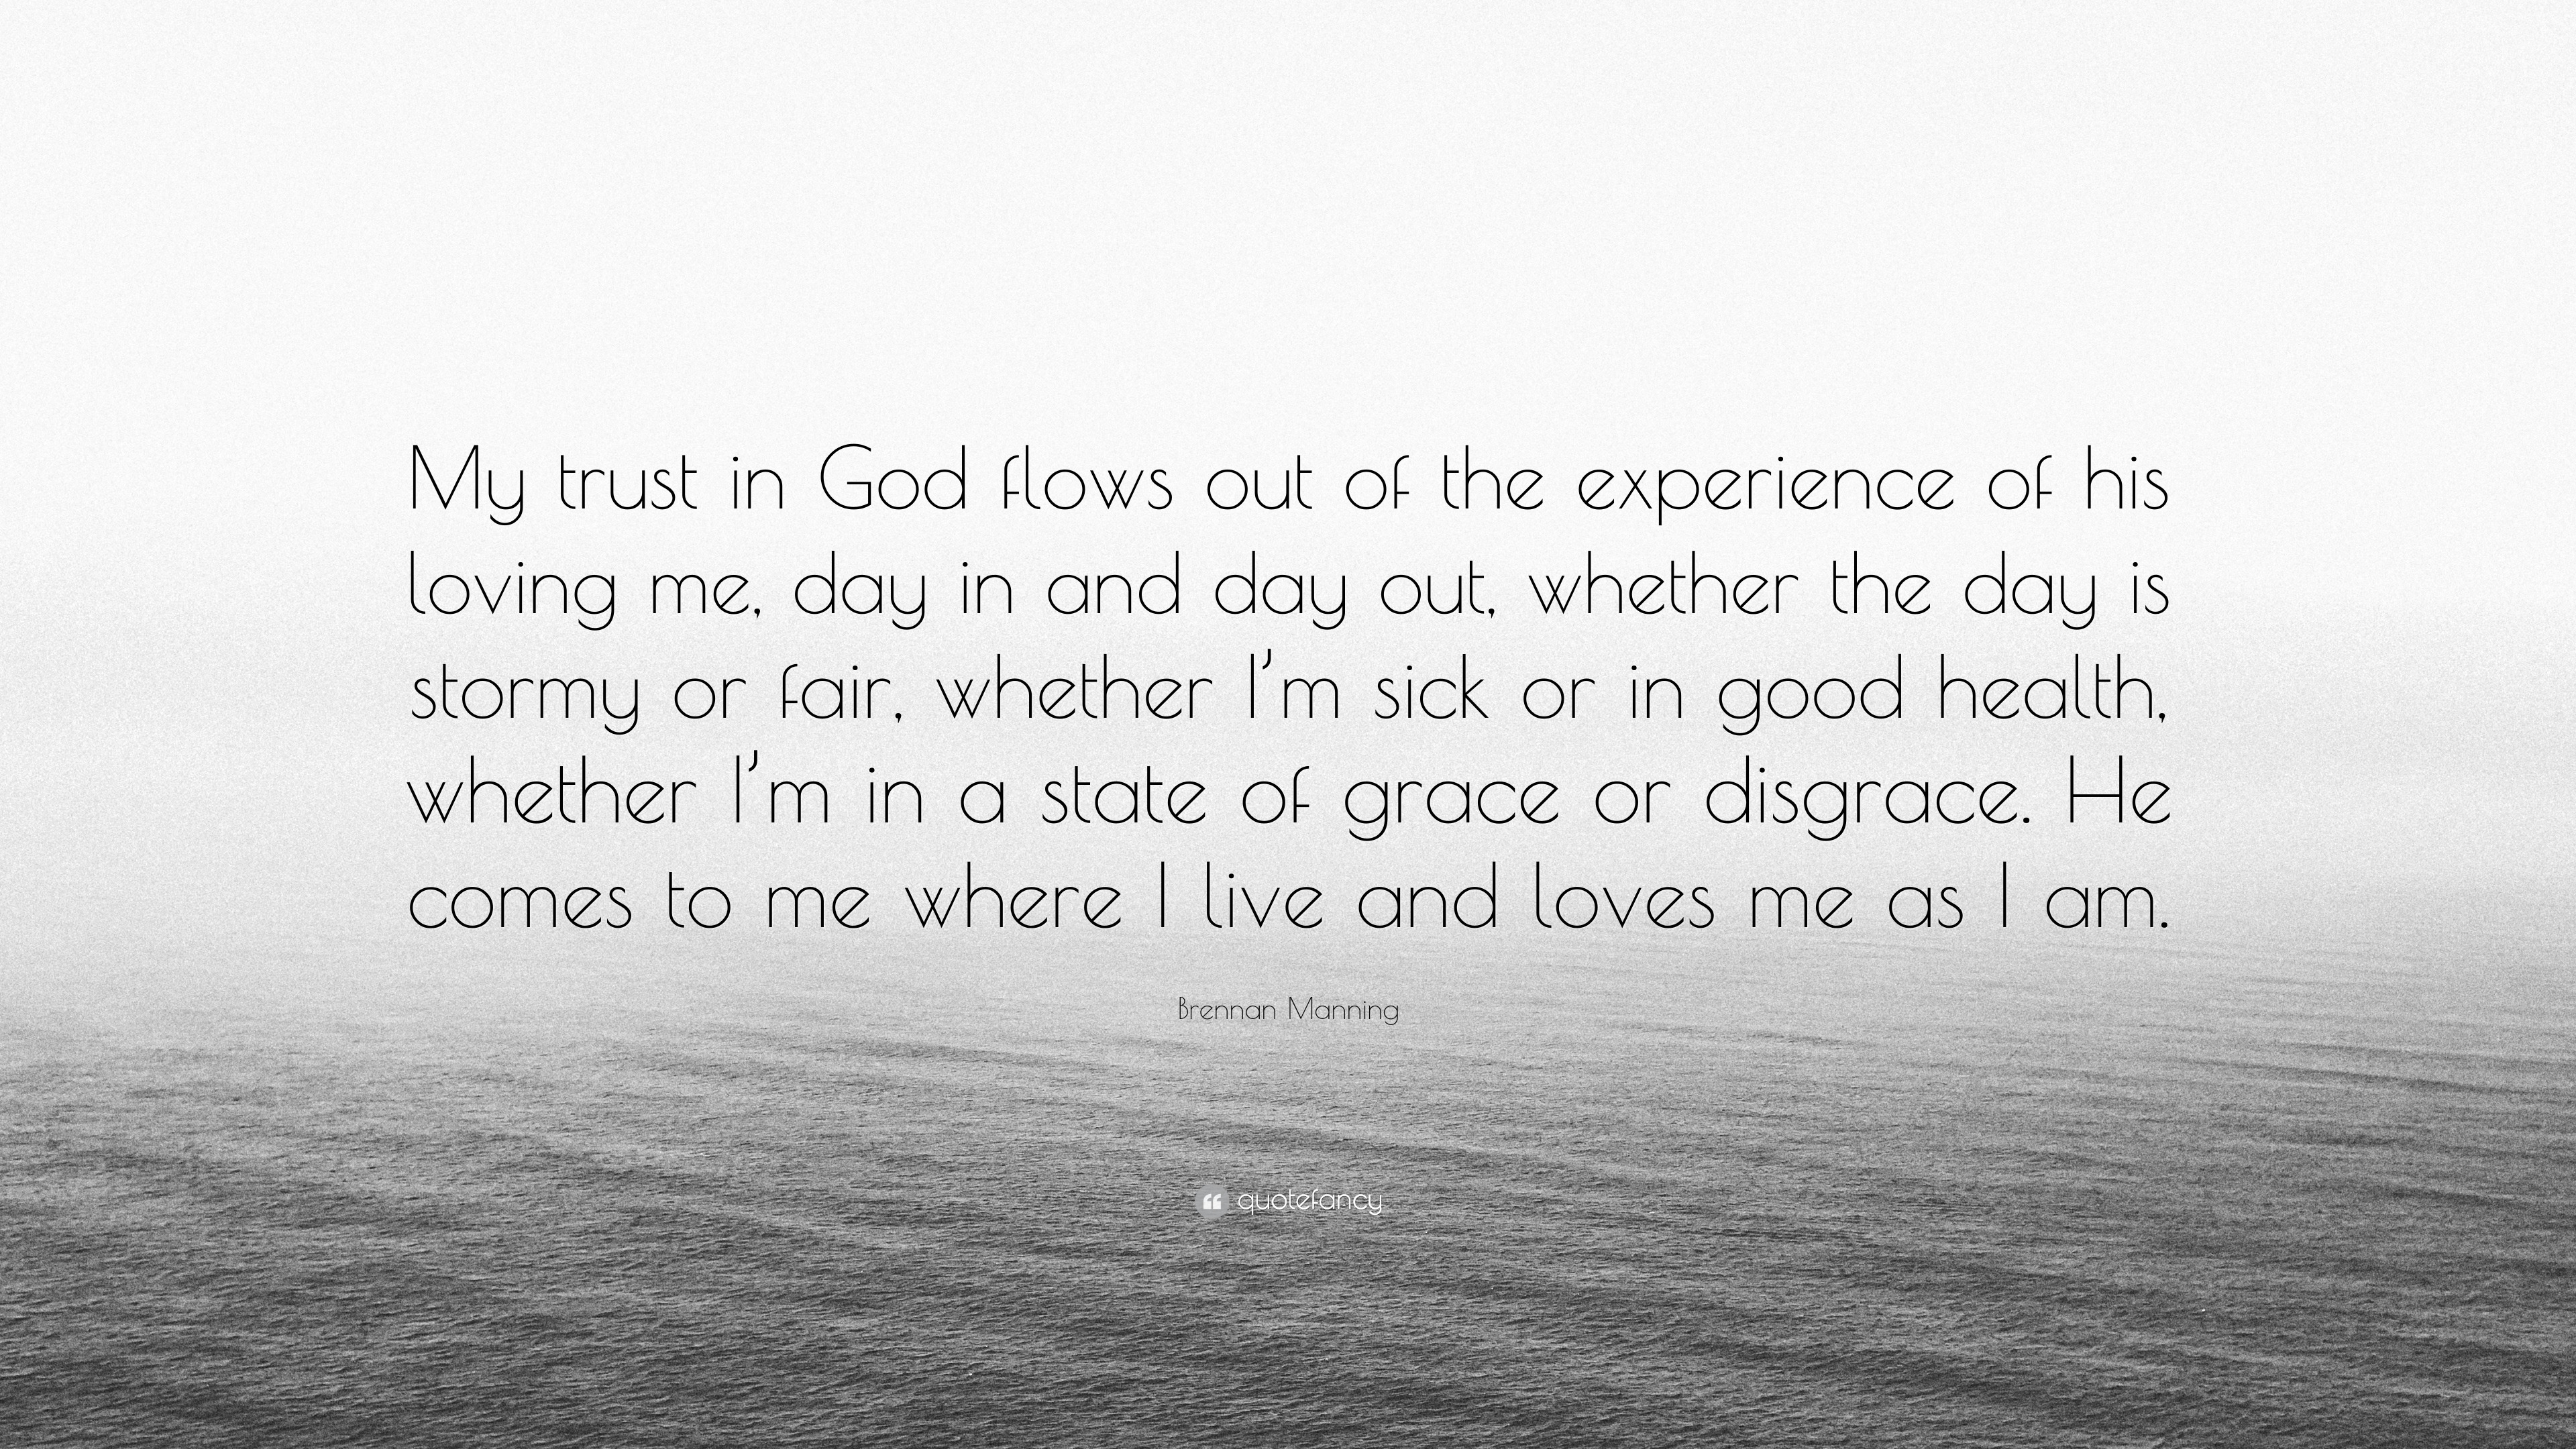 Brennan Manning Quote: “My trust in God flows out of the experience of ...